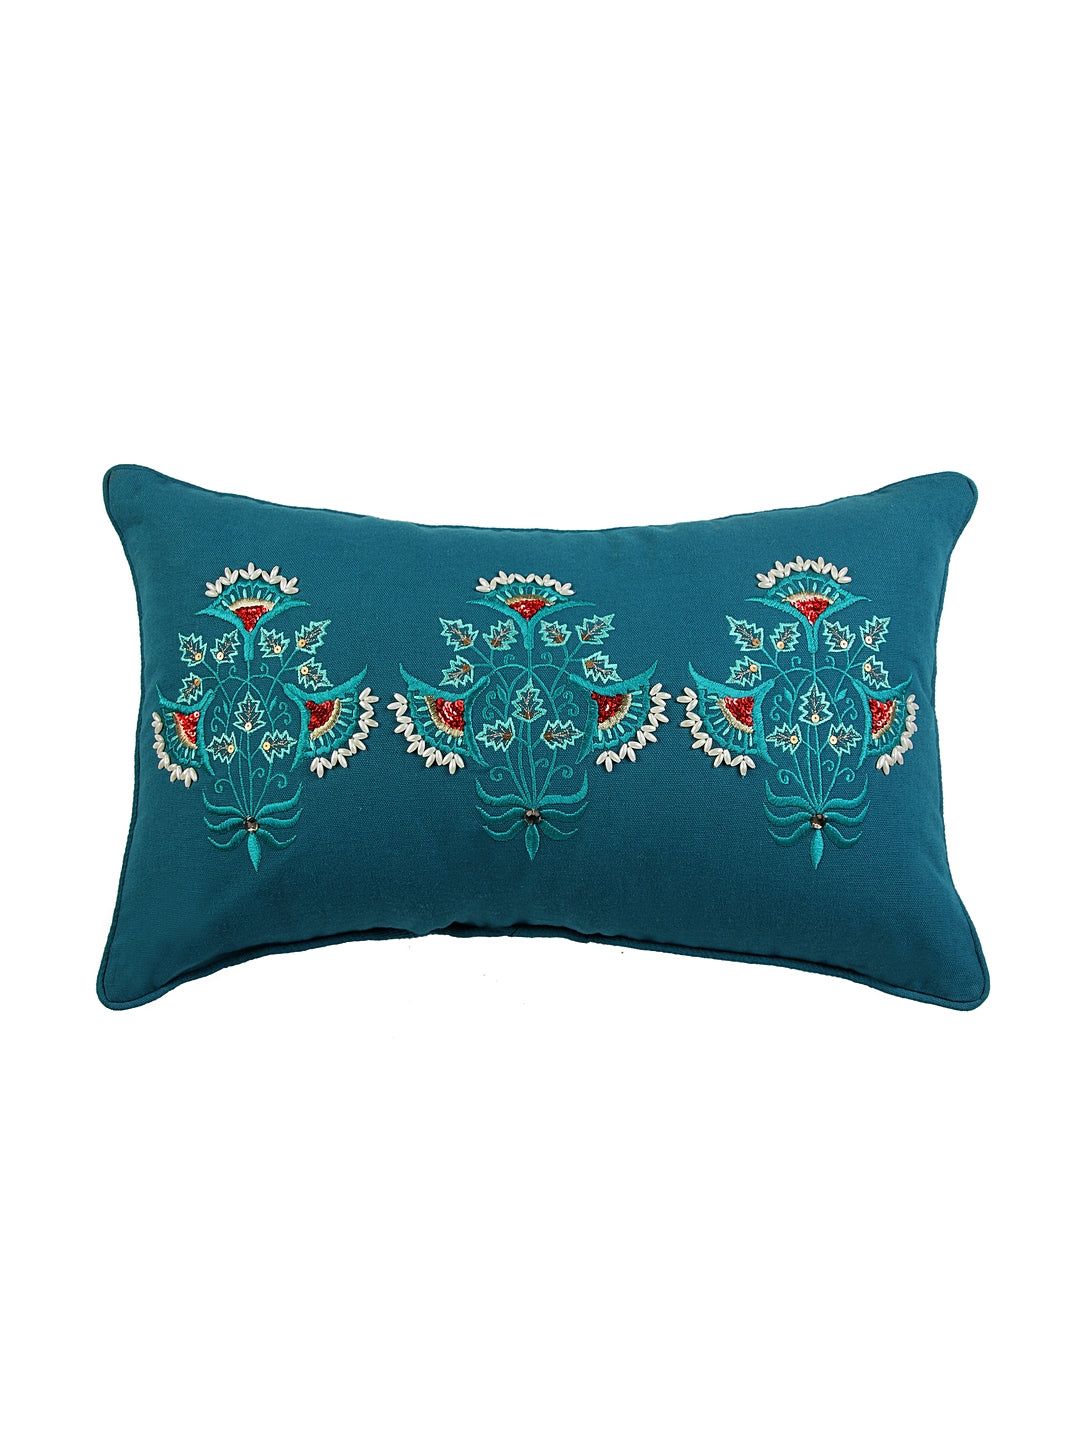 Contemporary Damask Cushion Cover with Filler 30x50cm